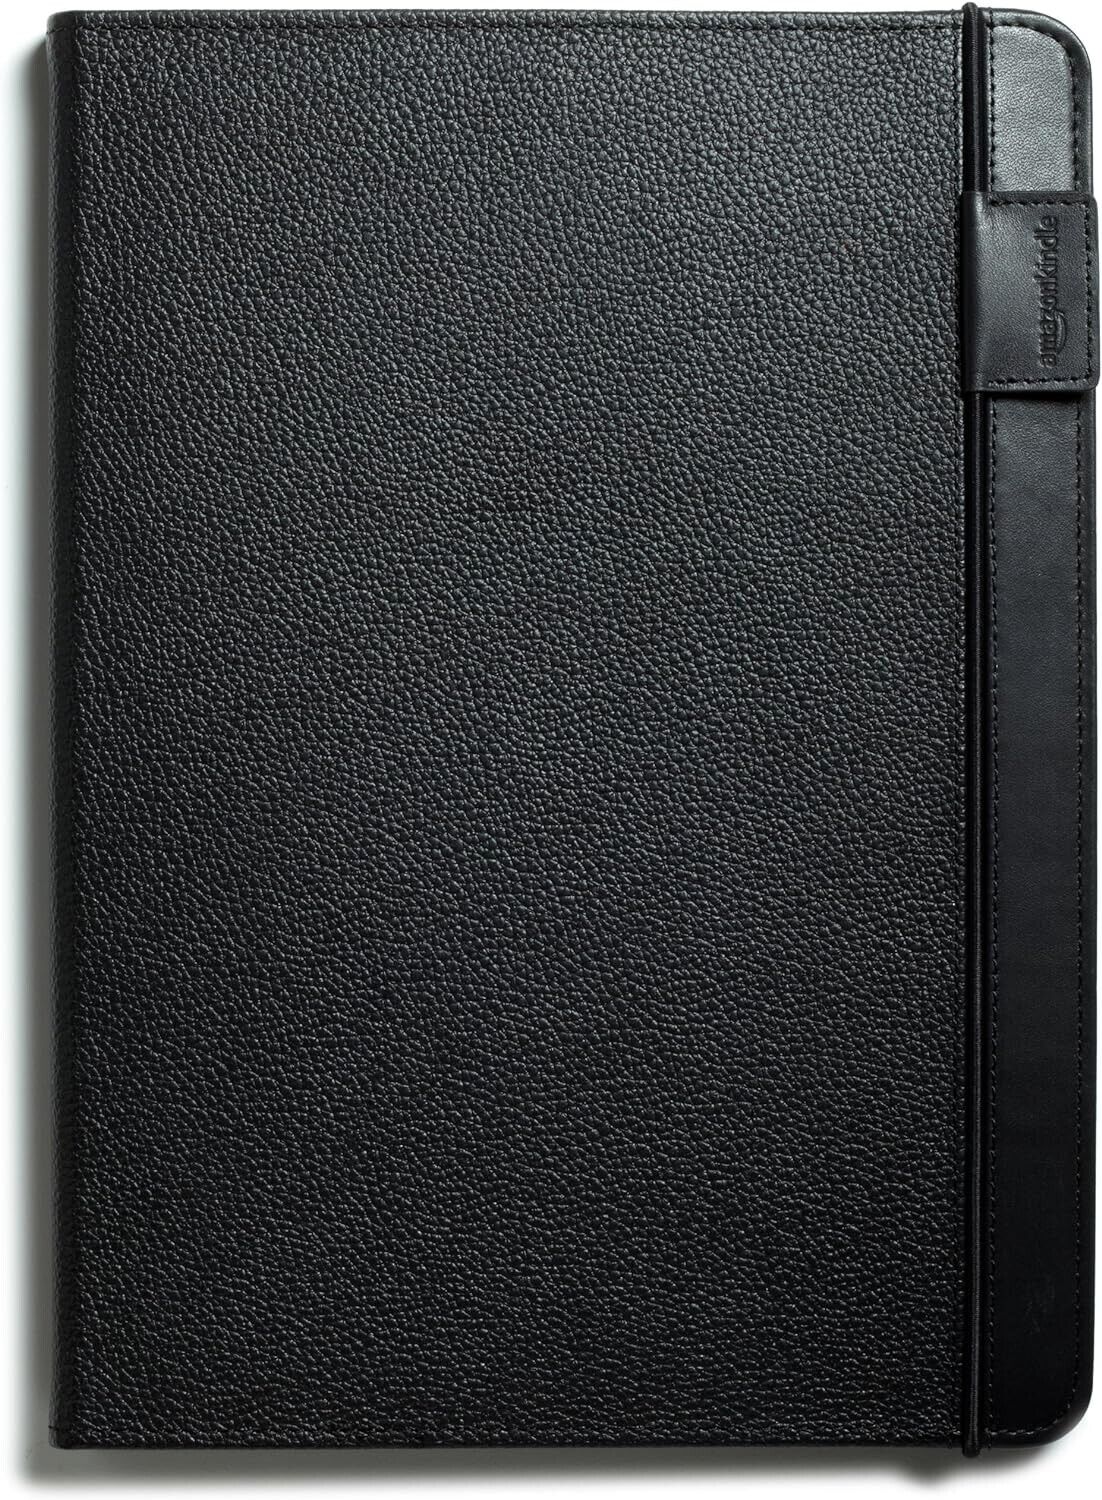 NEW Amazon Genuine Leather Cover for Kindle DX D00801, D00611; Original OEM Case